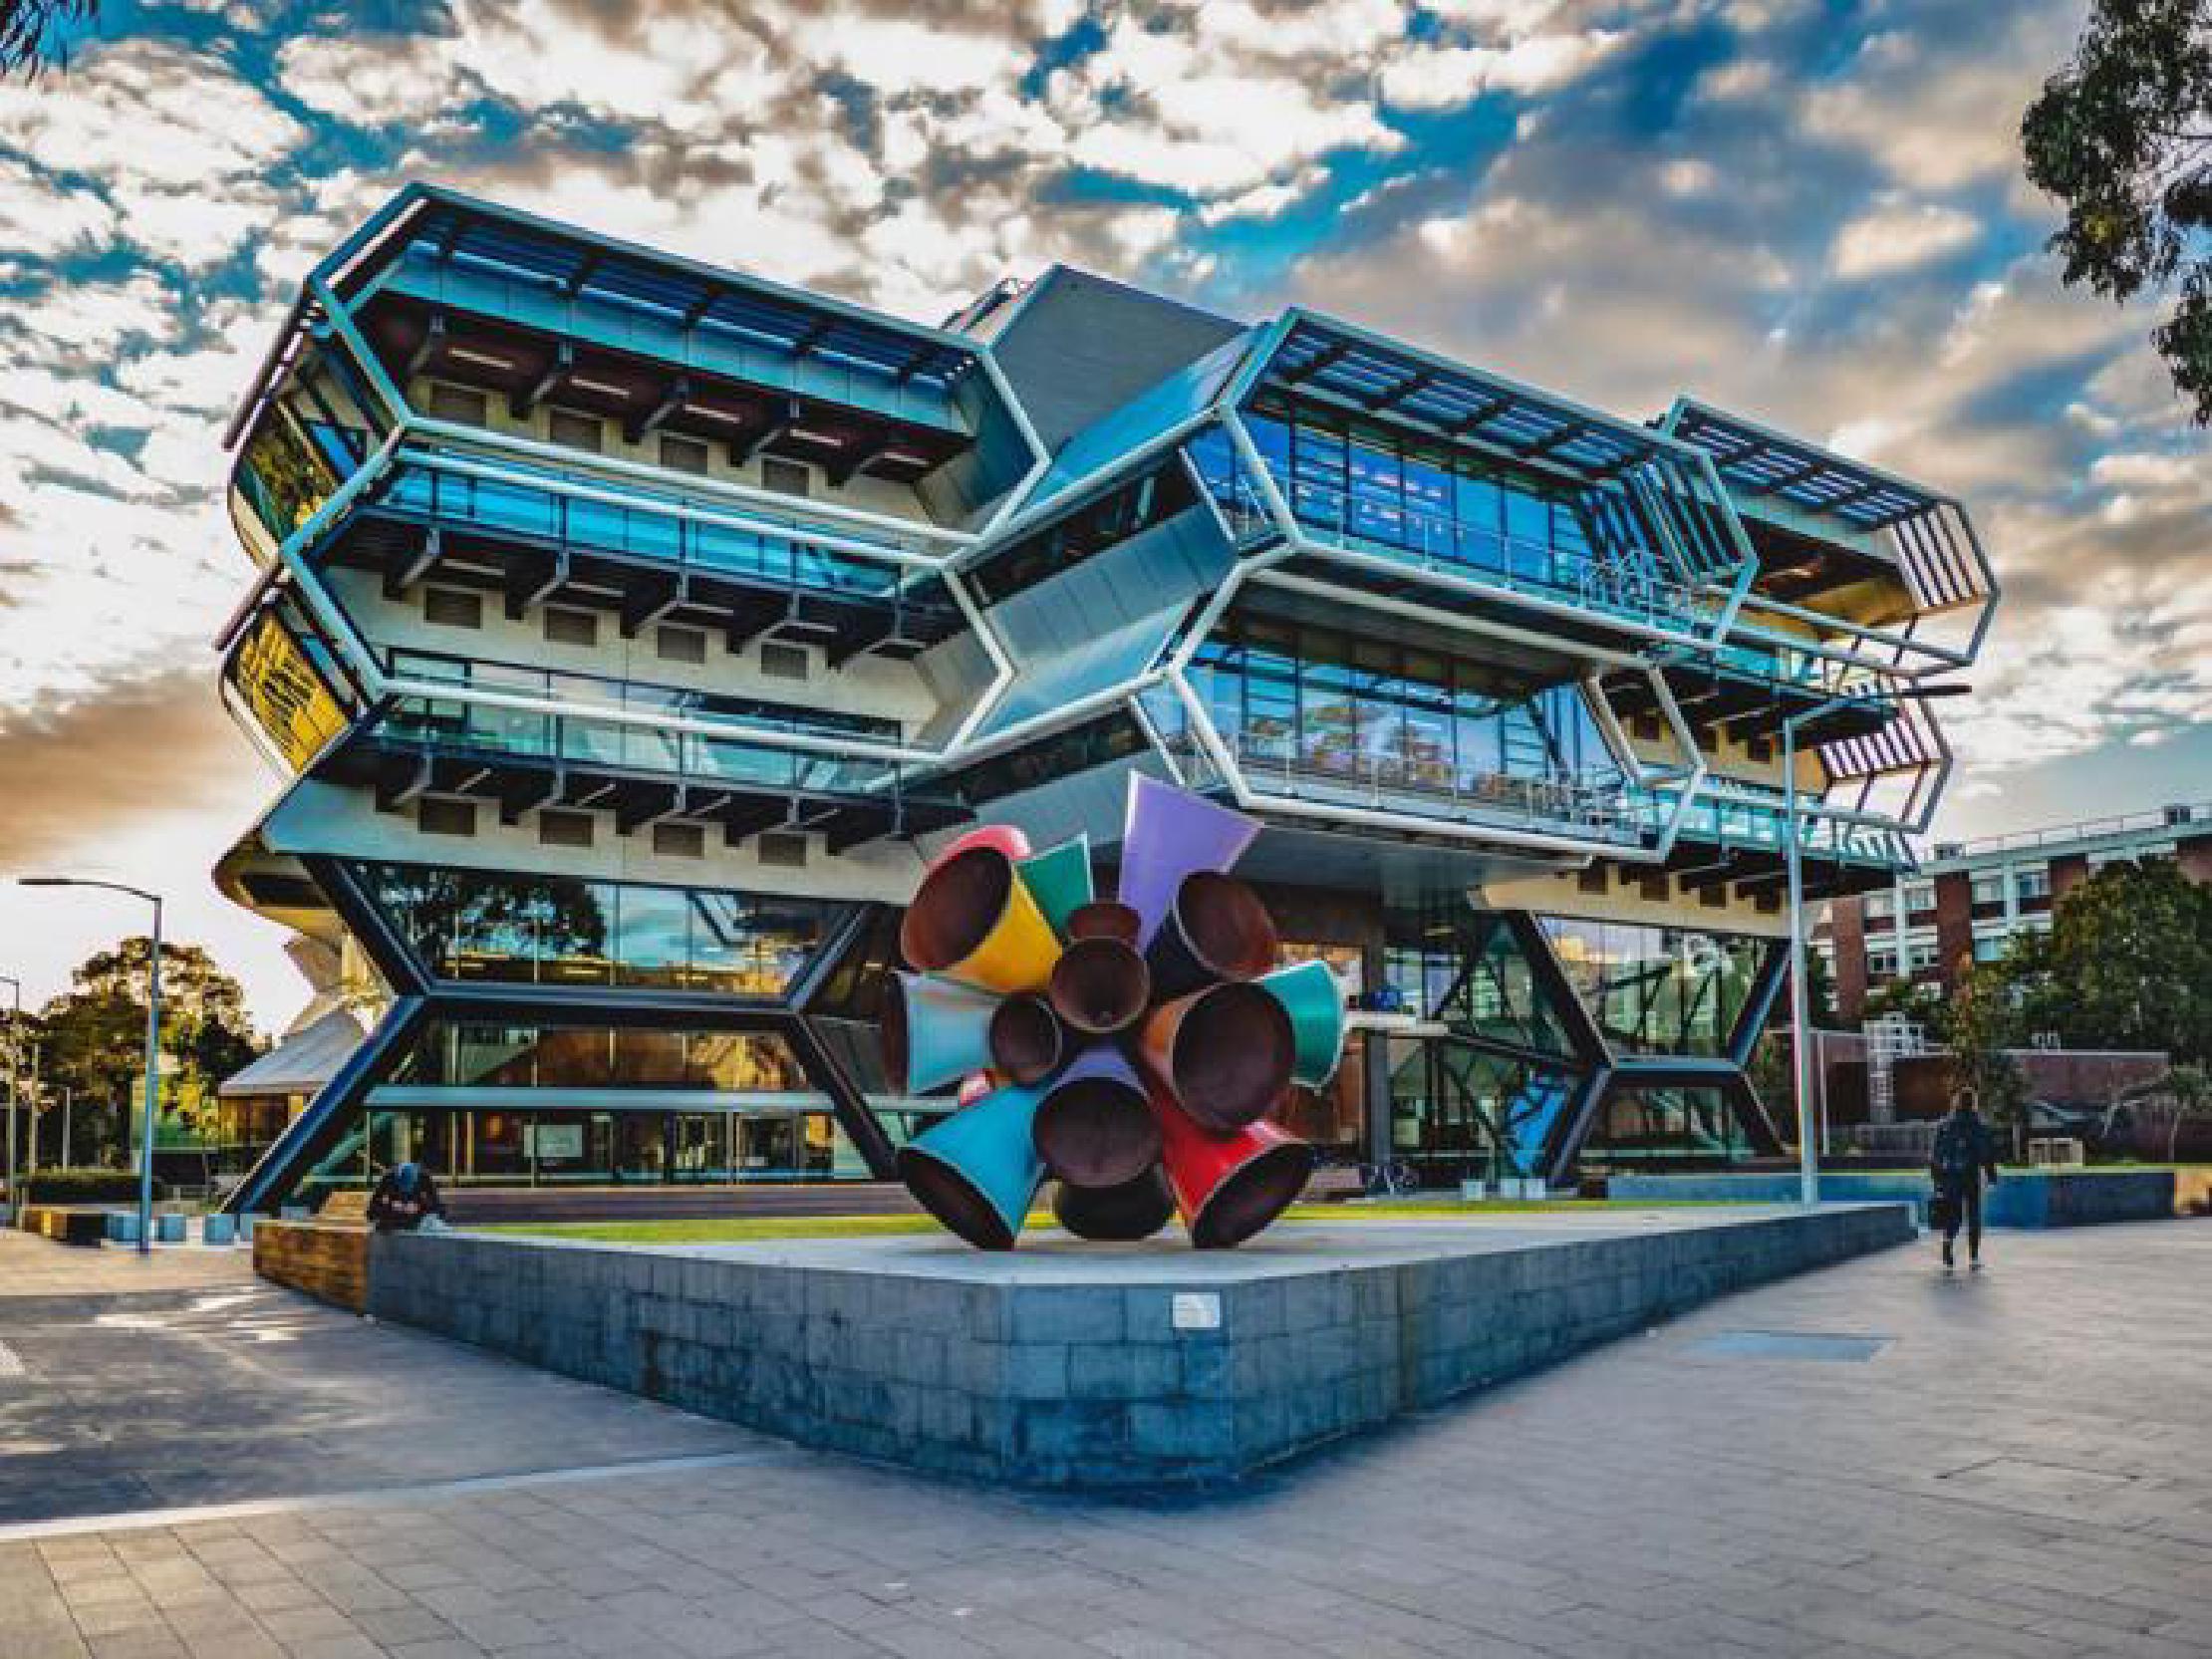 Thumbnail A colorful metal sculpture in fron of a modern building with 2 hexagonal floors